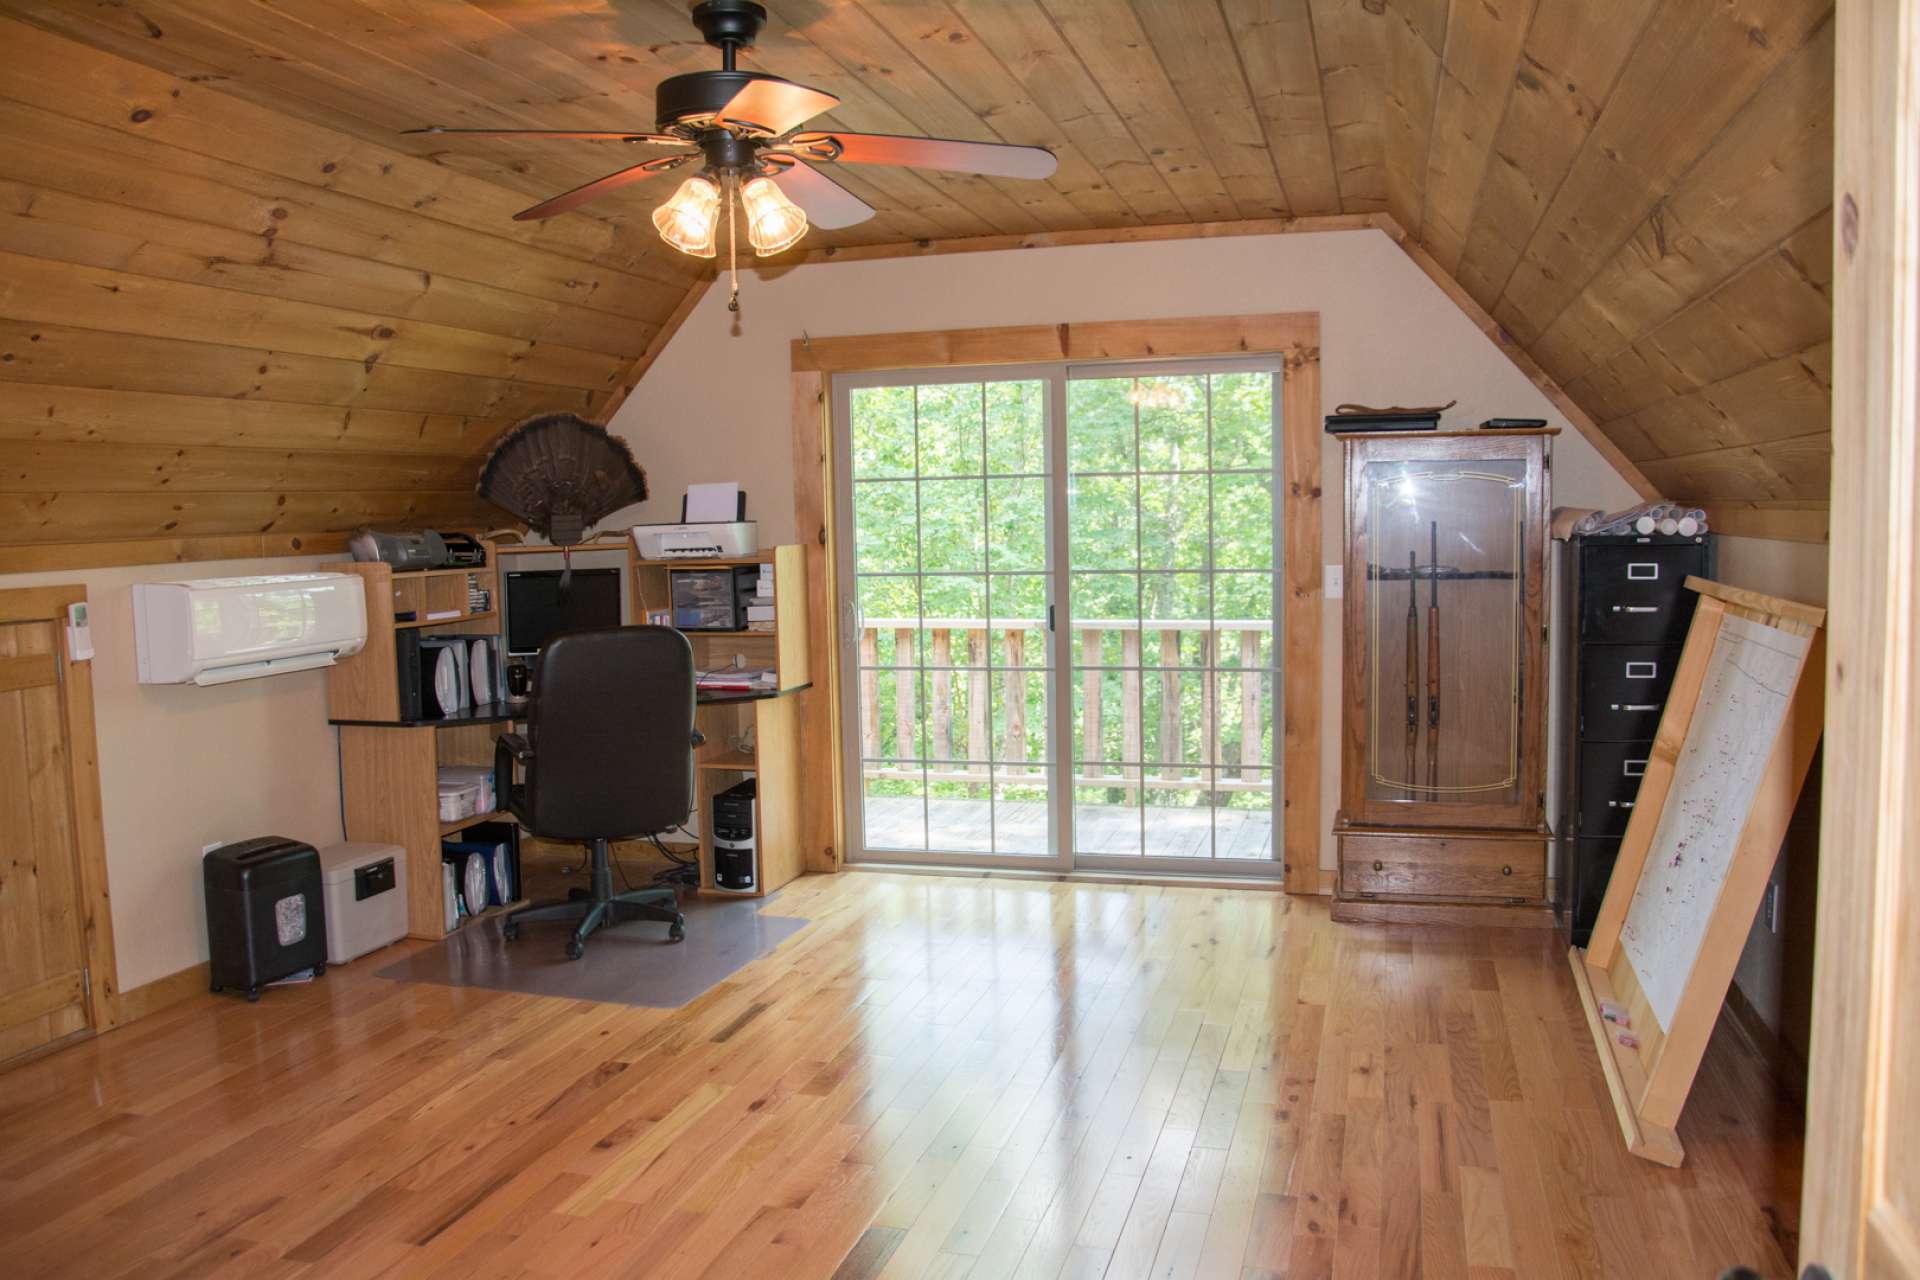 This spacious 15' x 18' bonus room with private deck is also located on the upper level offering the perfect office space or additional sleeping space. This room also has a private balcony.